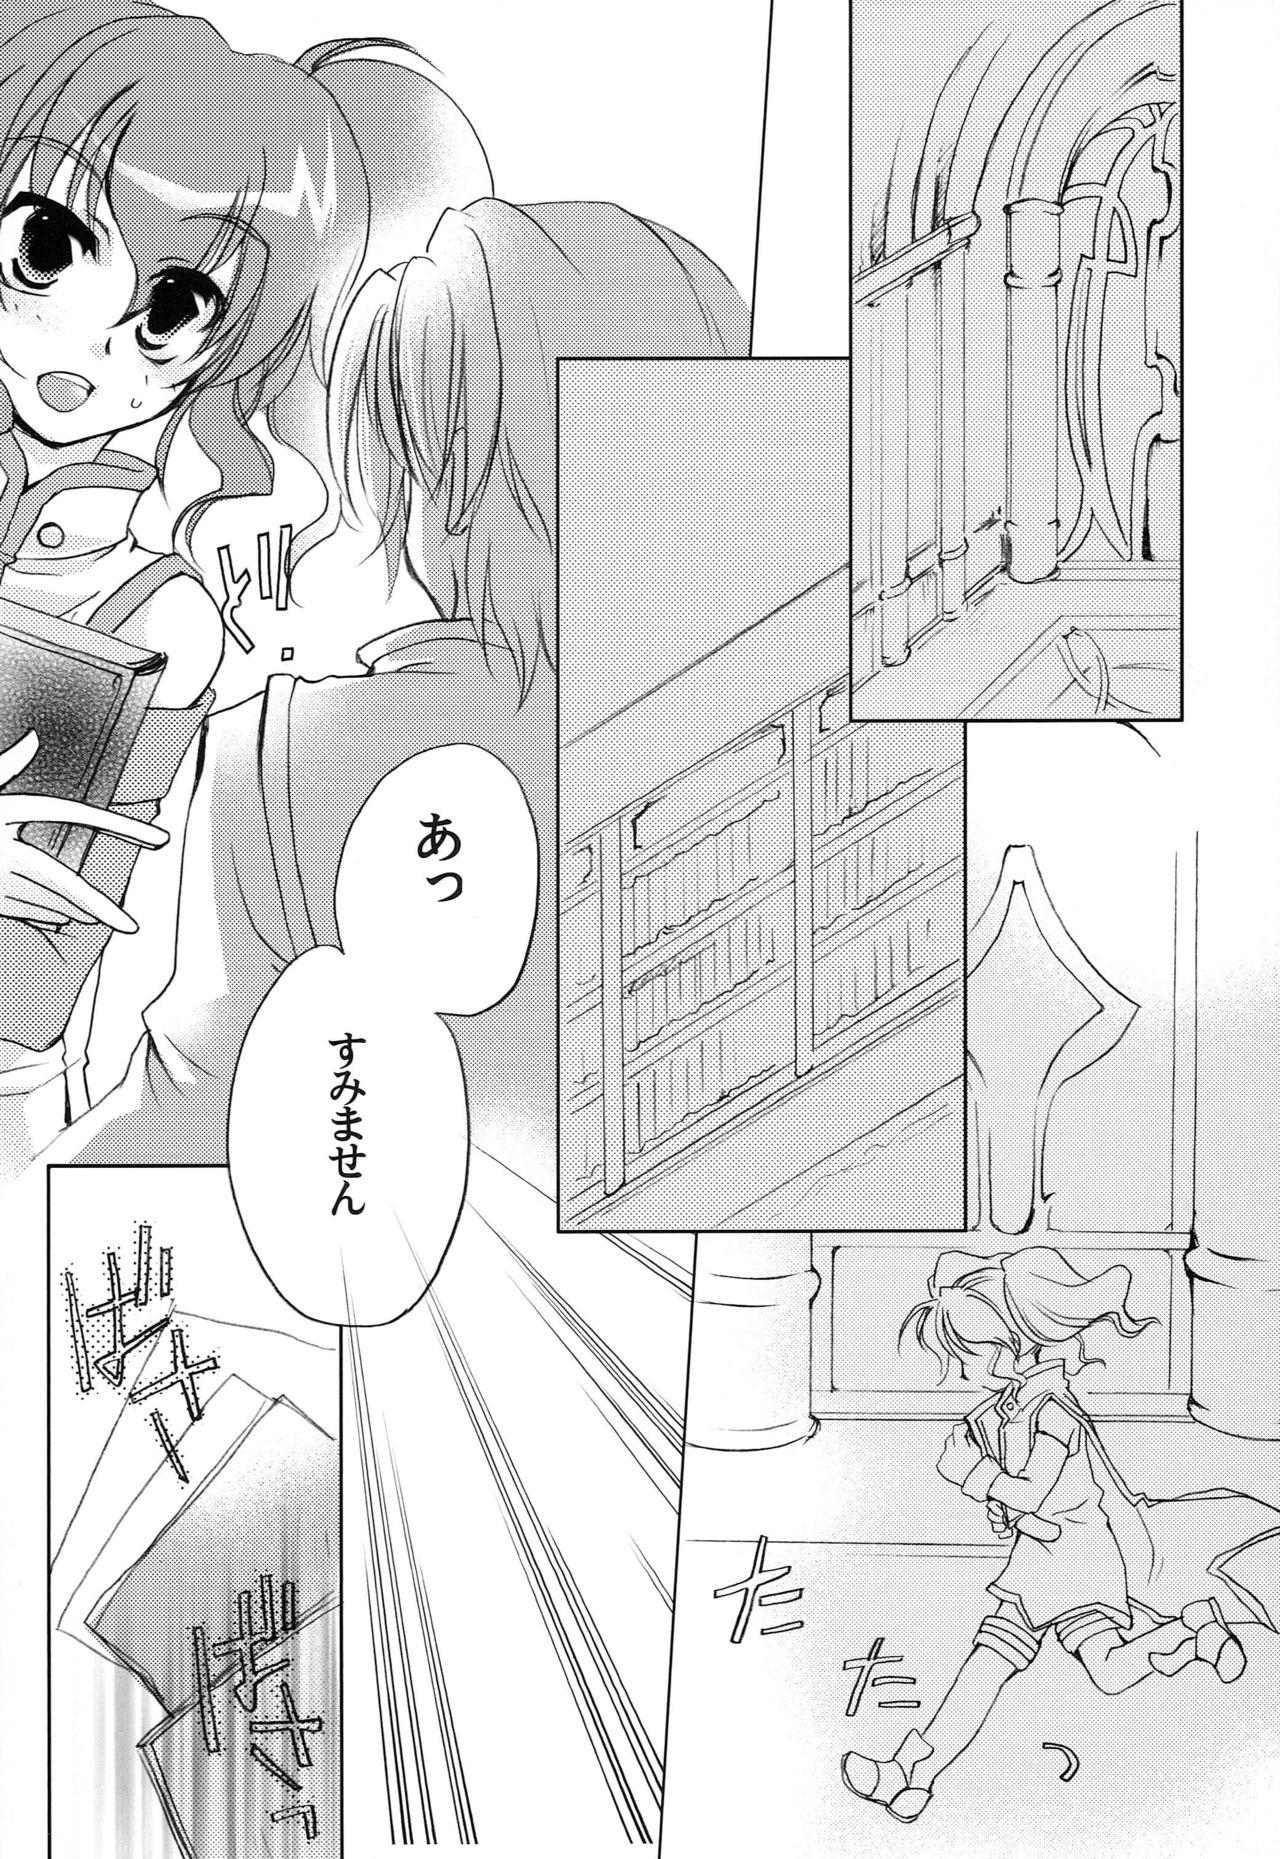 Fuck Carnation, Lily, Lily, Rose - Tales of the abyss Bigass - Page 3